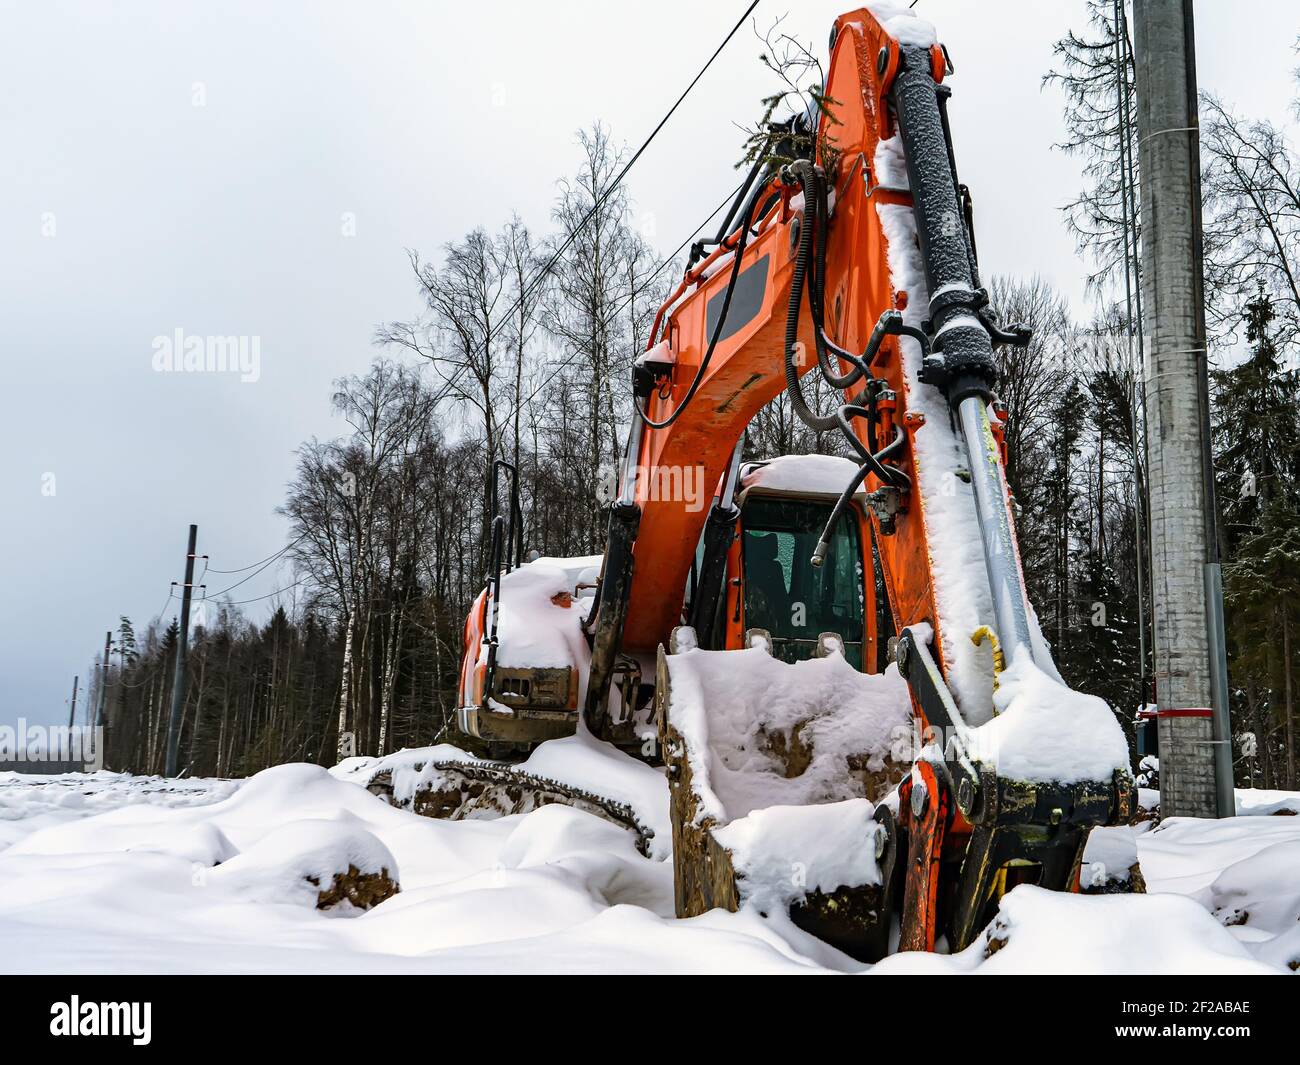 Large orange excavator covered with snow. Abandoned non-working broken construction equipment. Stock Photo